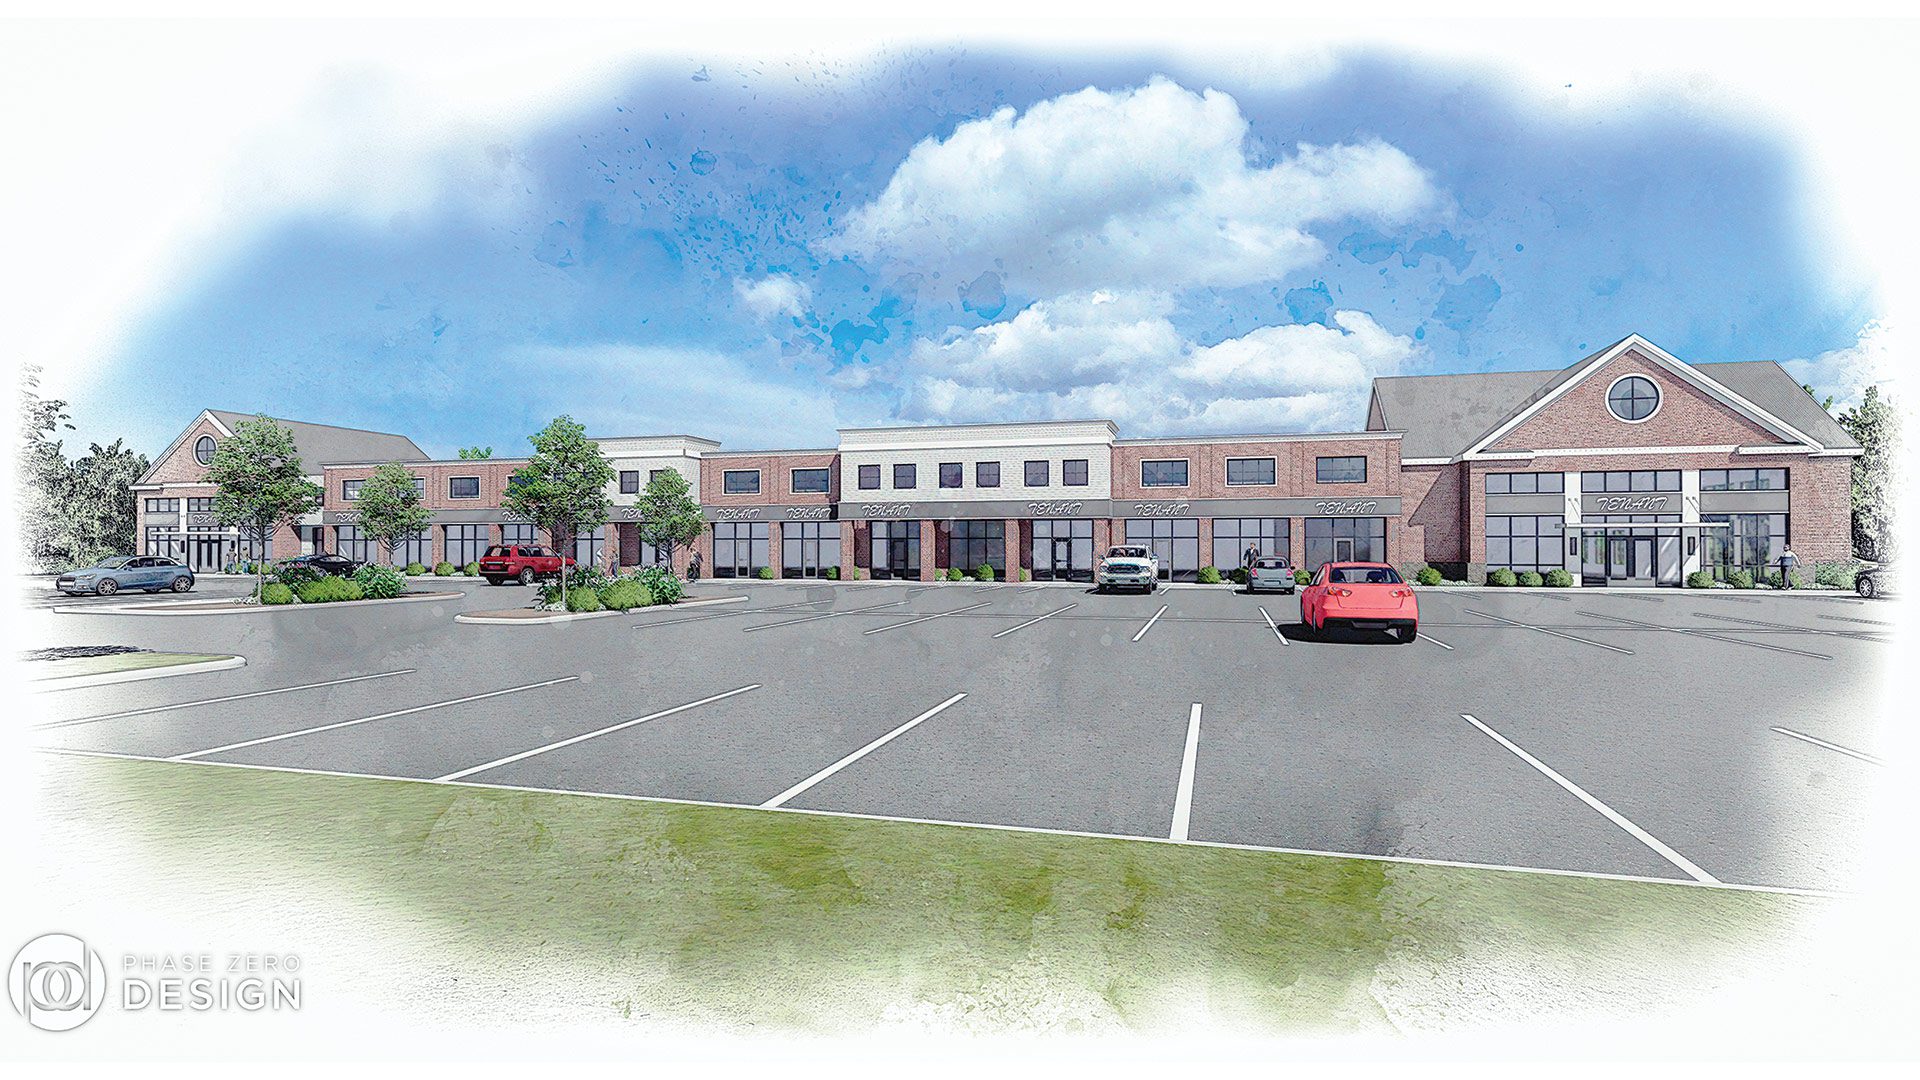 An architect’s rendering of the planned Towne Shoppes of Longmeadow.